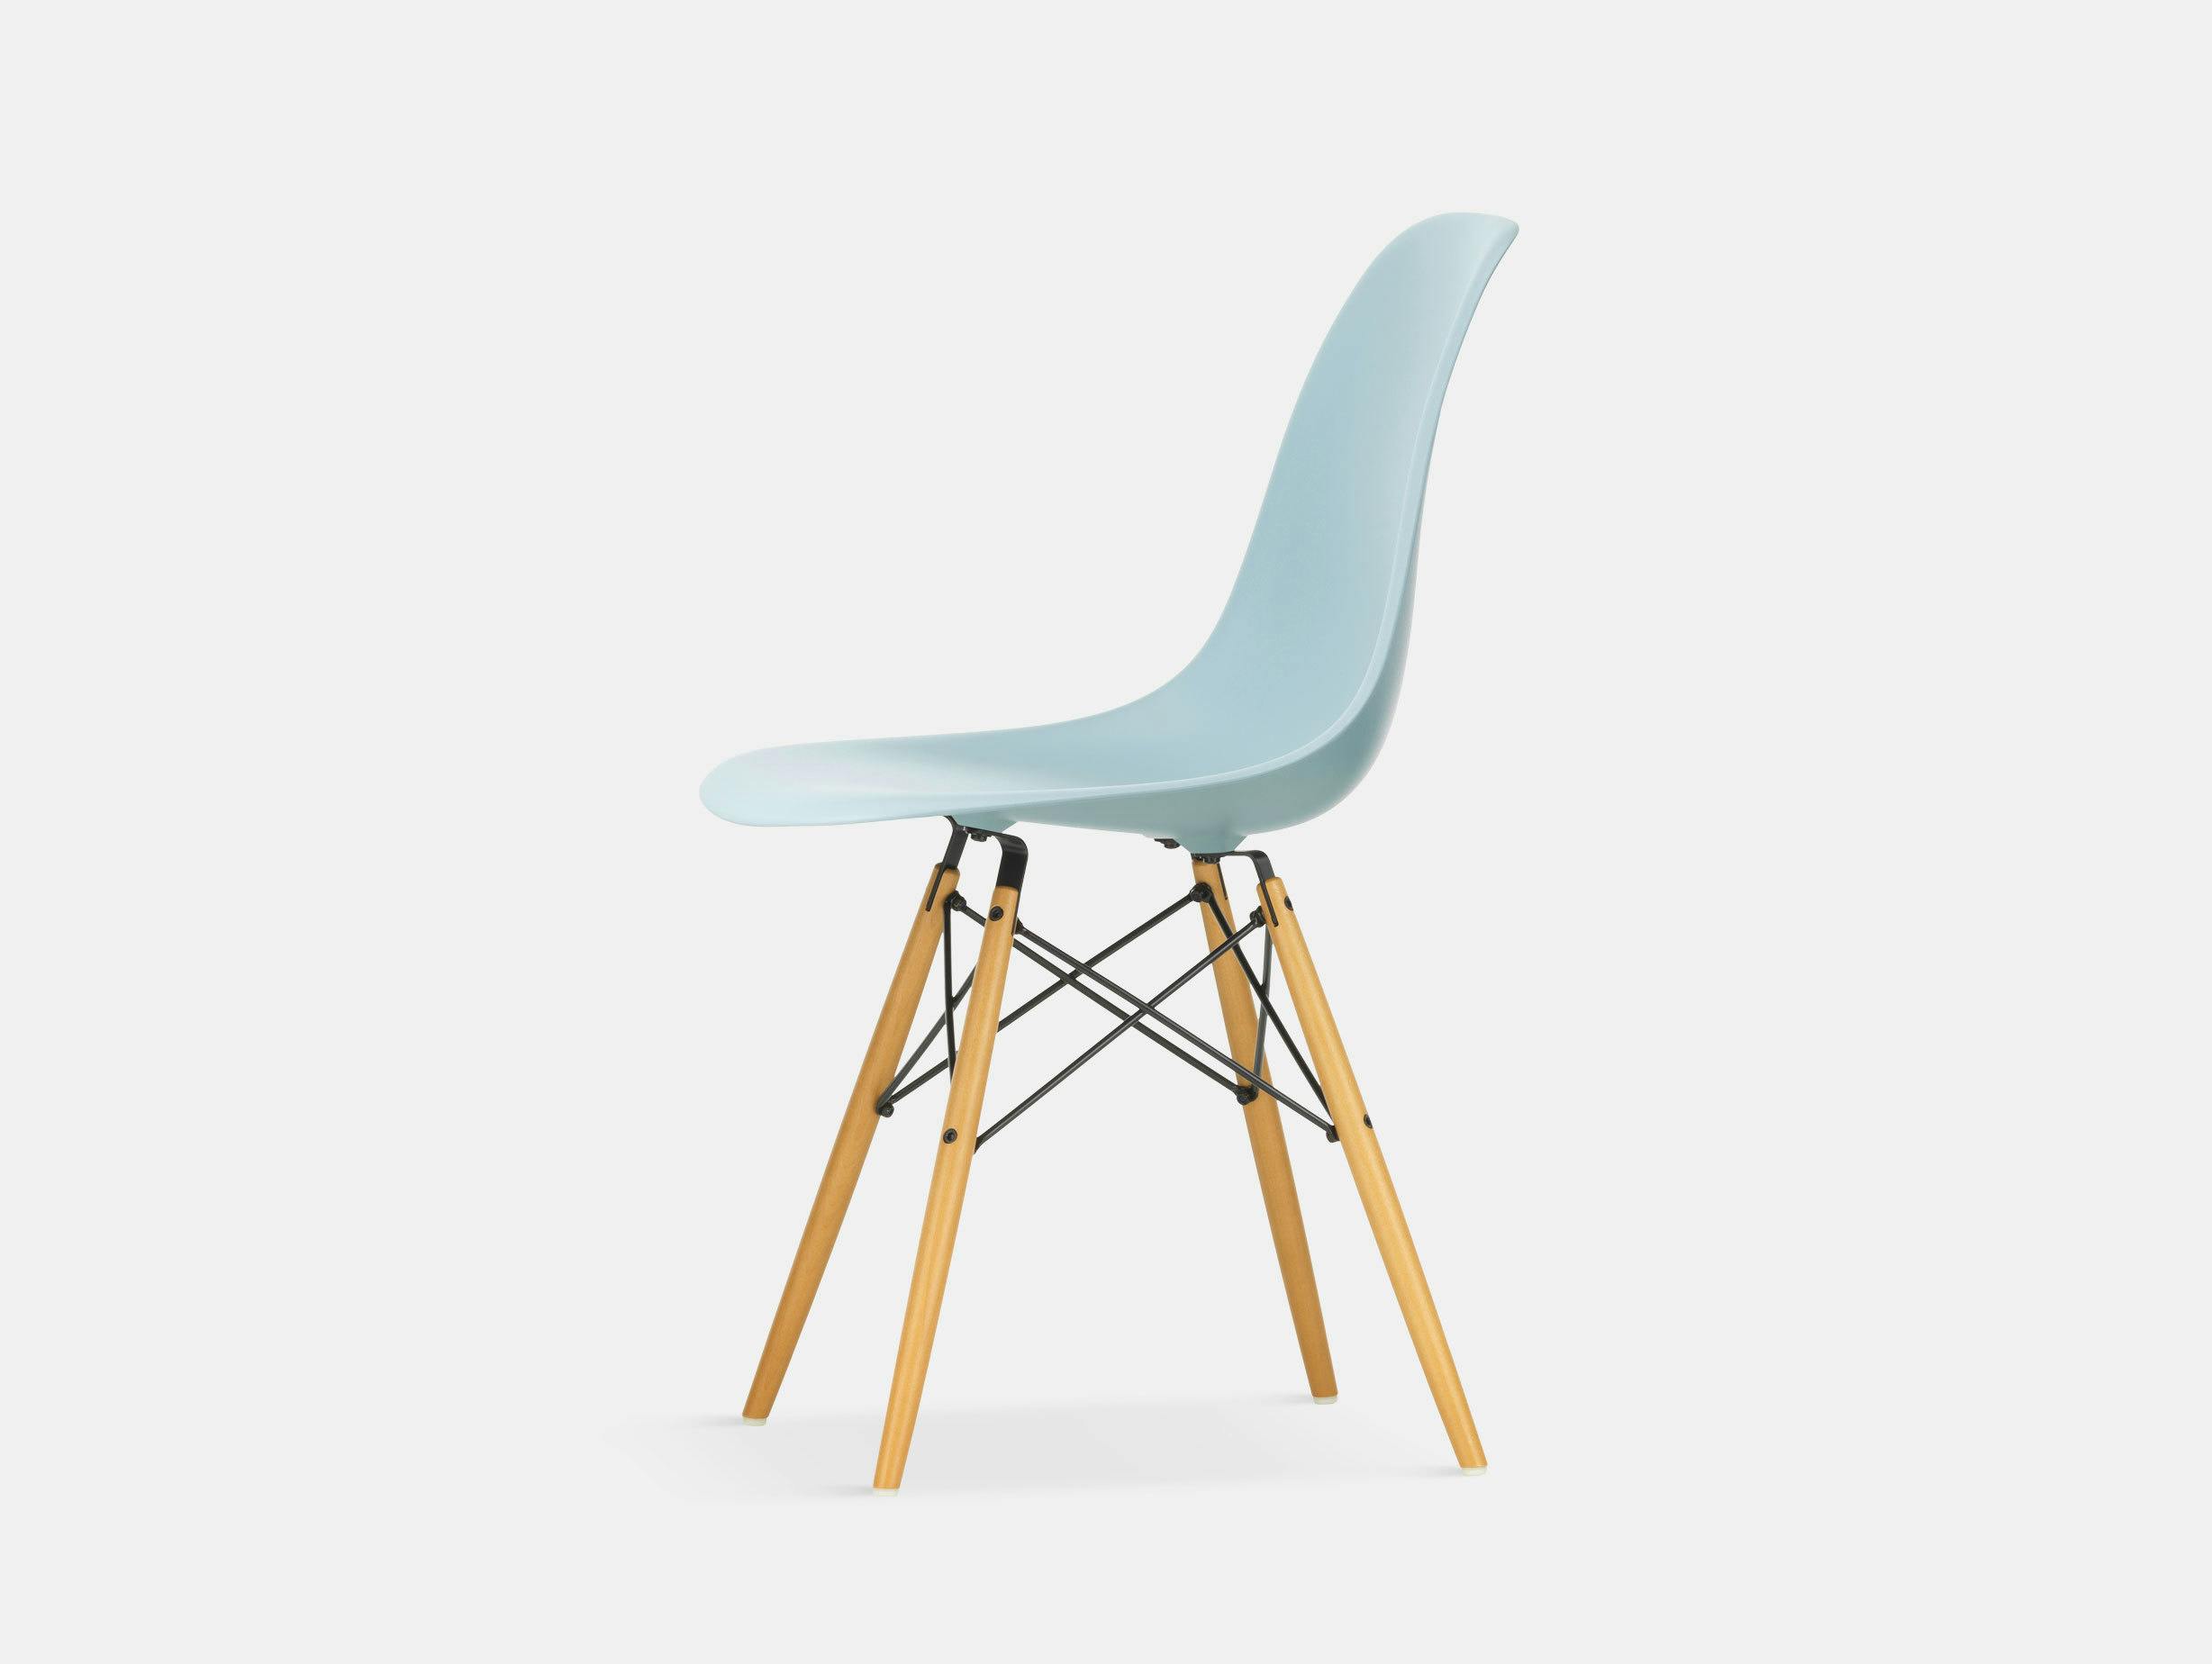 Vitra Eames DSW Plastic Side Chair ice grey golden maple legs